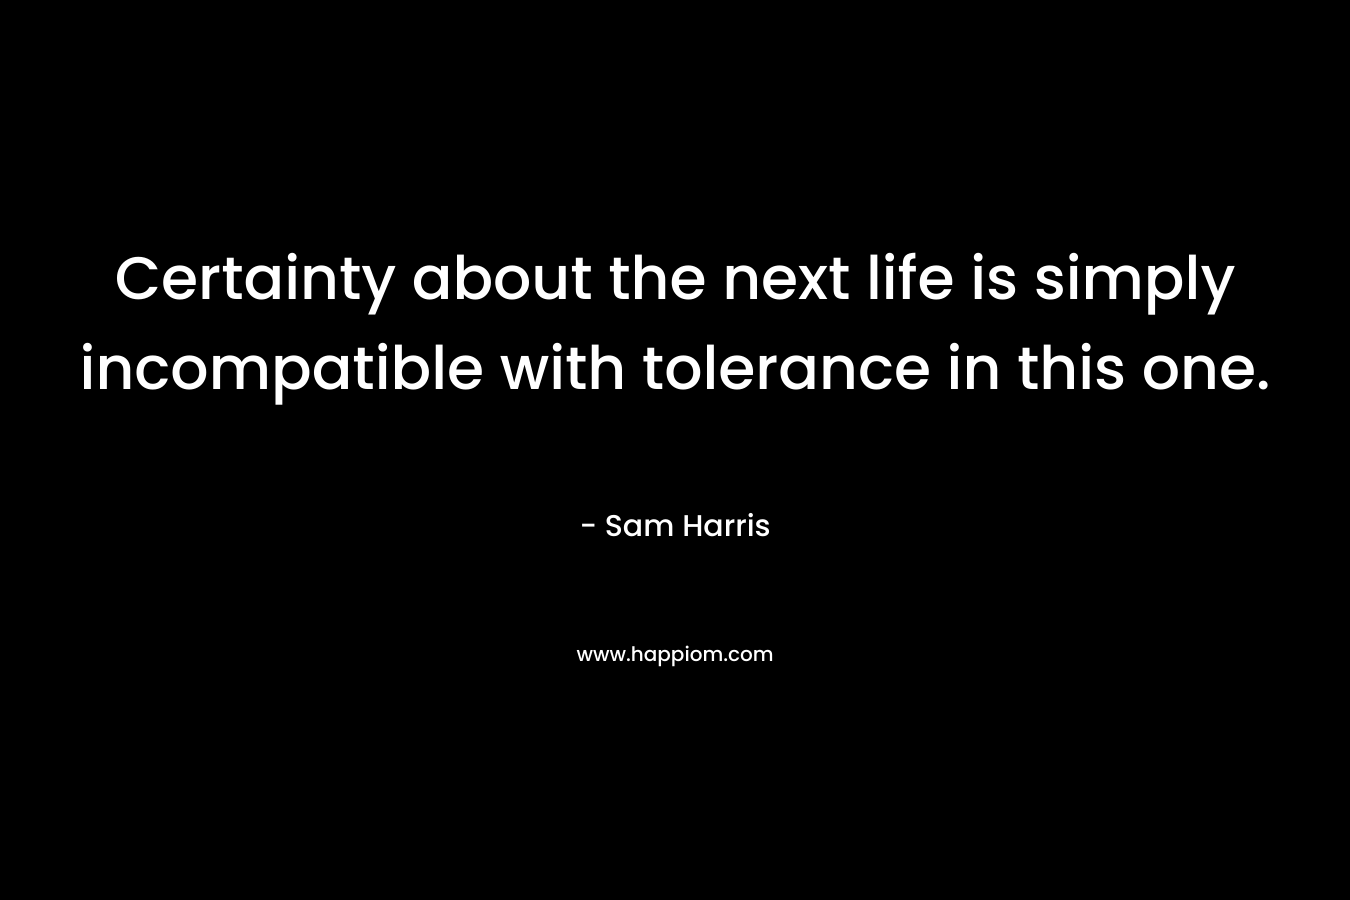 Certainty about the next life is simply incompatible with tolerance in this one. – Sam Harris